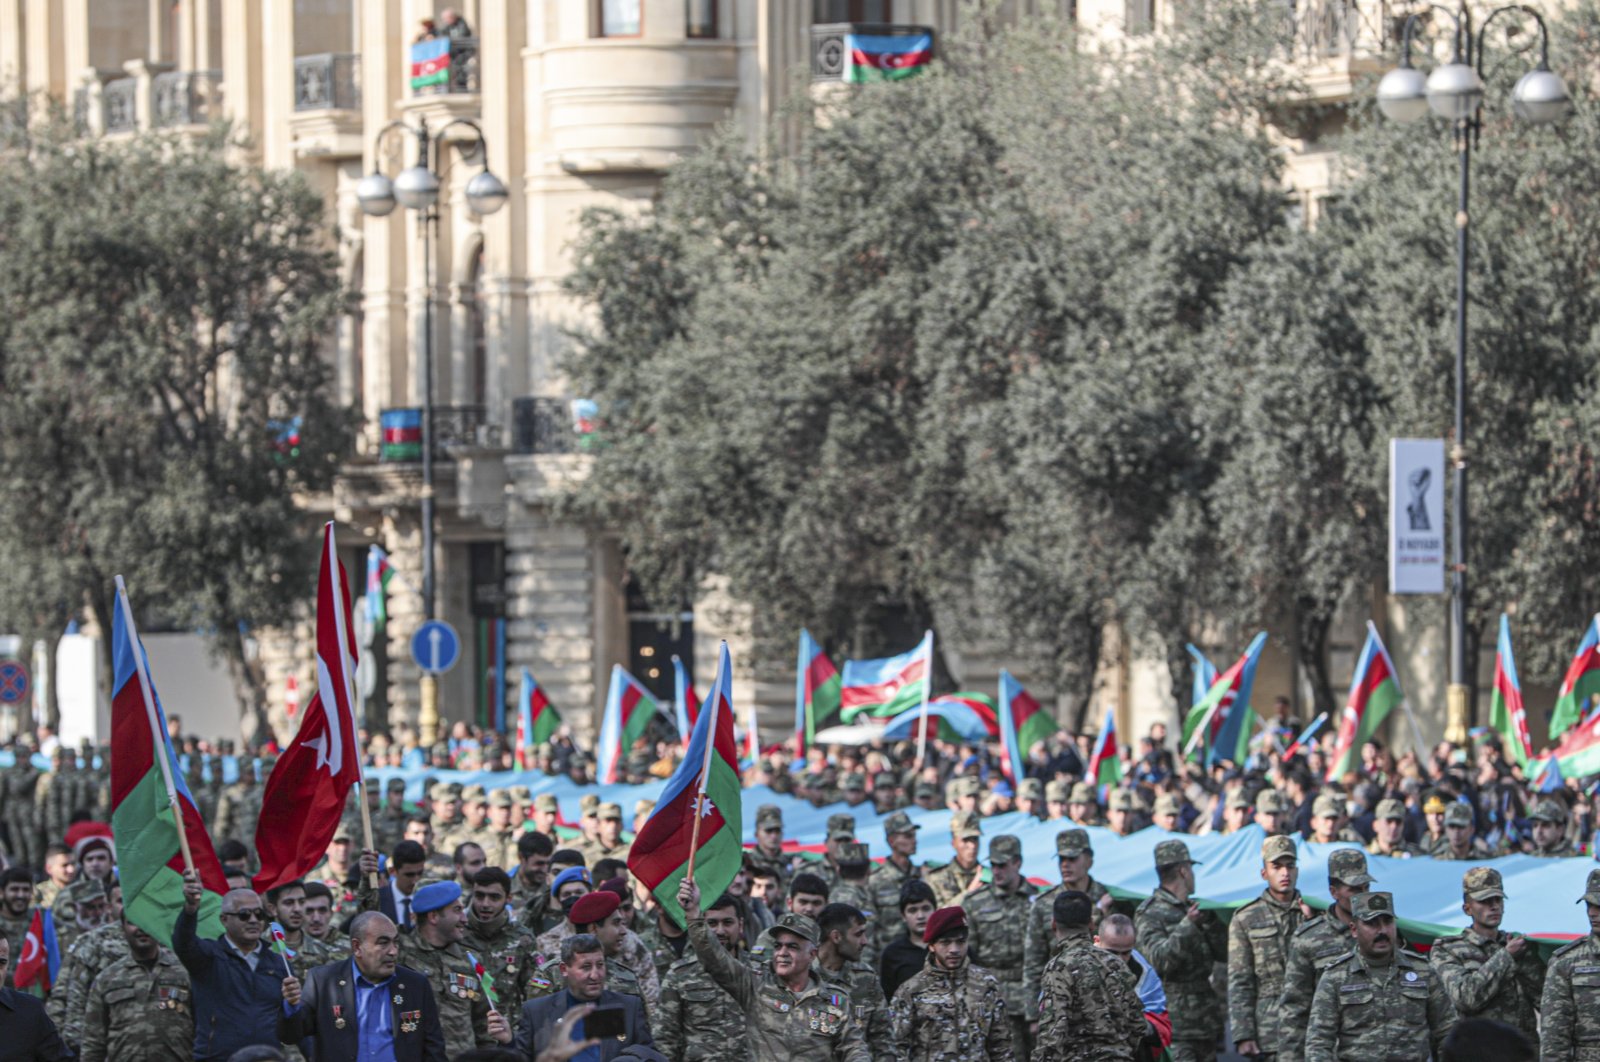 Azerbaijani soldiers carry a large-scale national flag on the anniversary of the end of the 2020 war over the Nagorno-Karabakh region between Azerbaijan and Armenia, in downtown Baku, Azerbaijan, 08 November 2021. (EPA Photo)